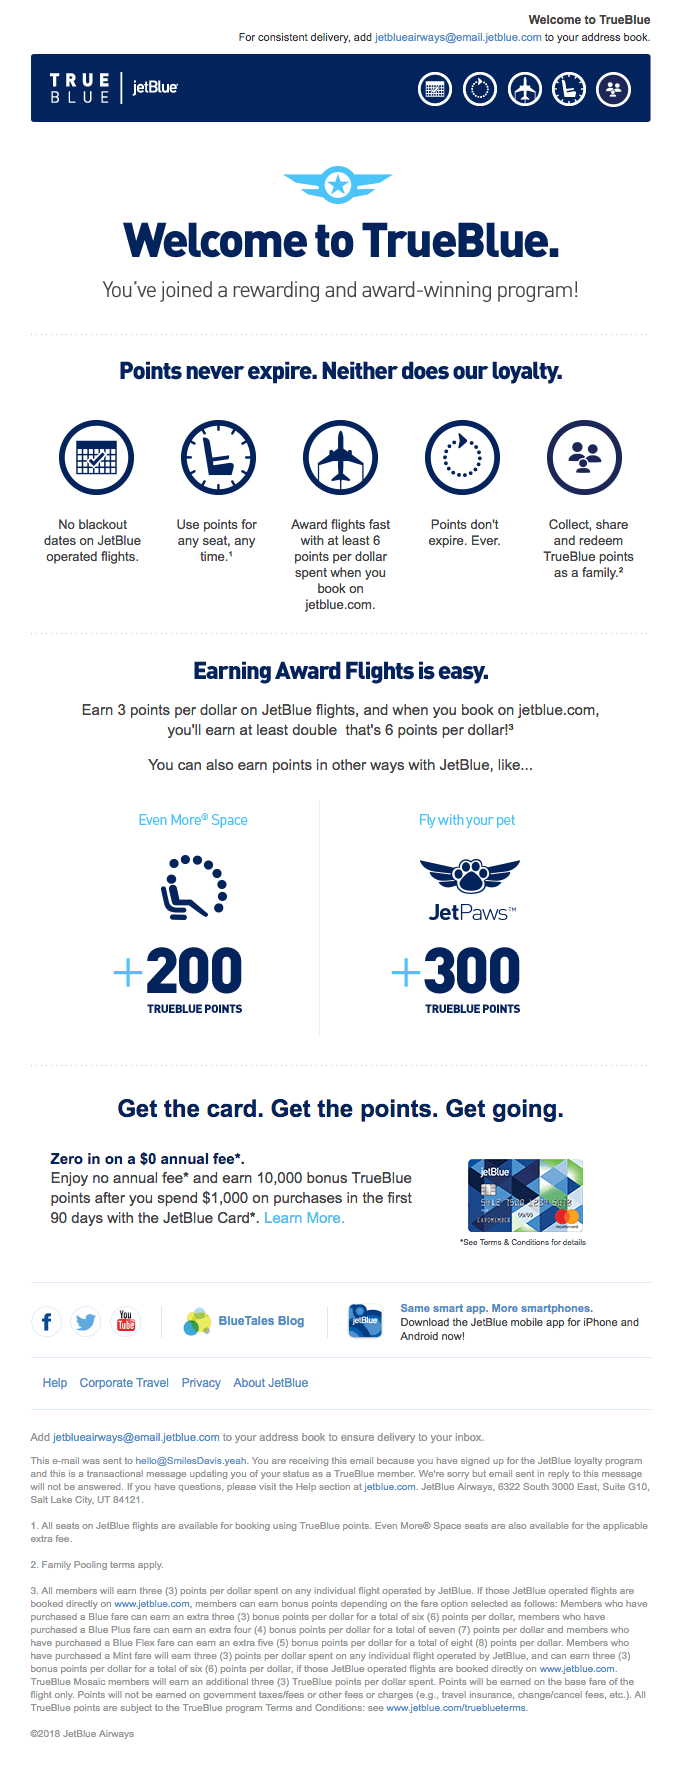 Welcome emails examples - JetBlue